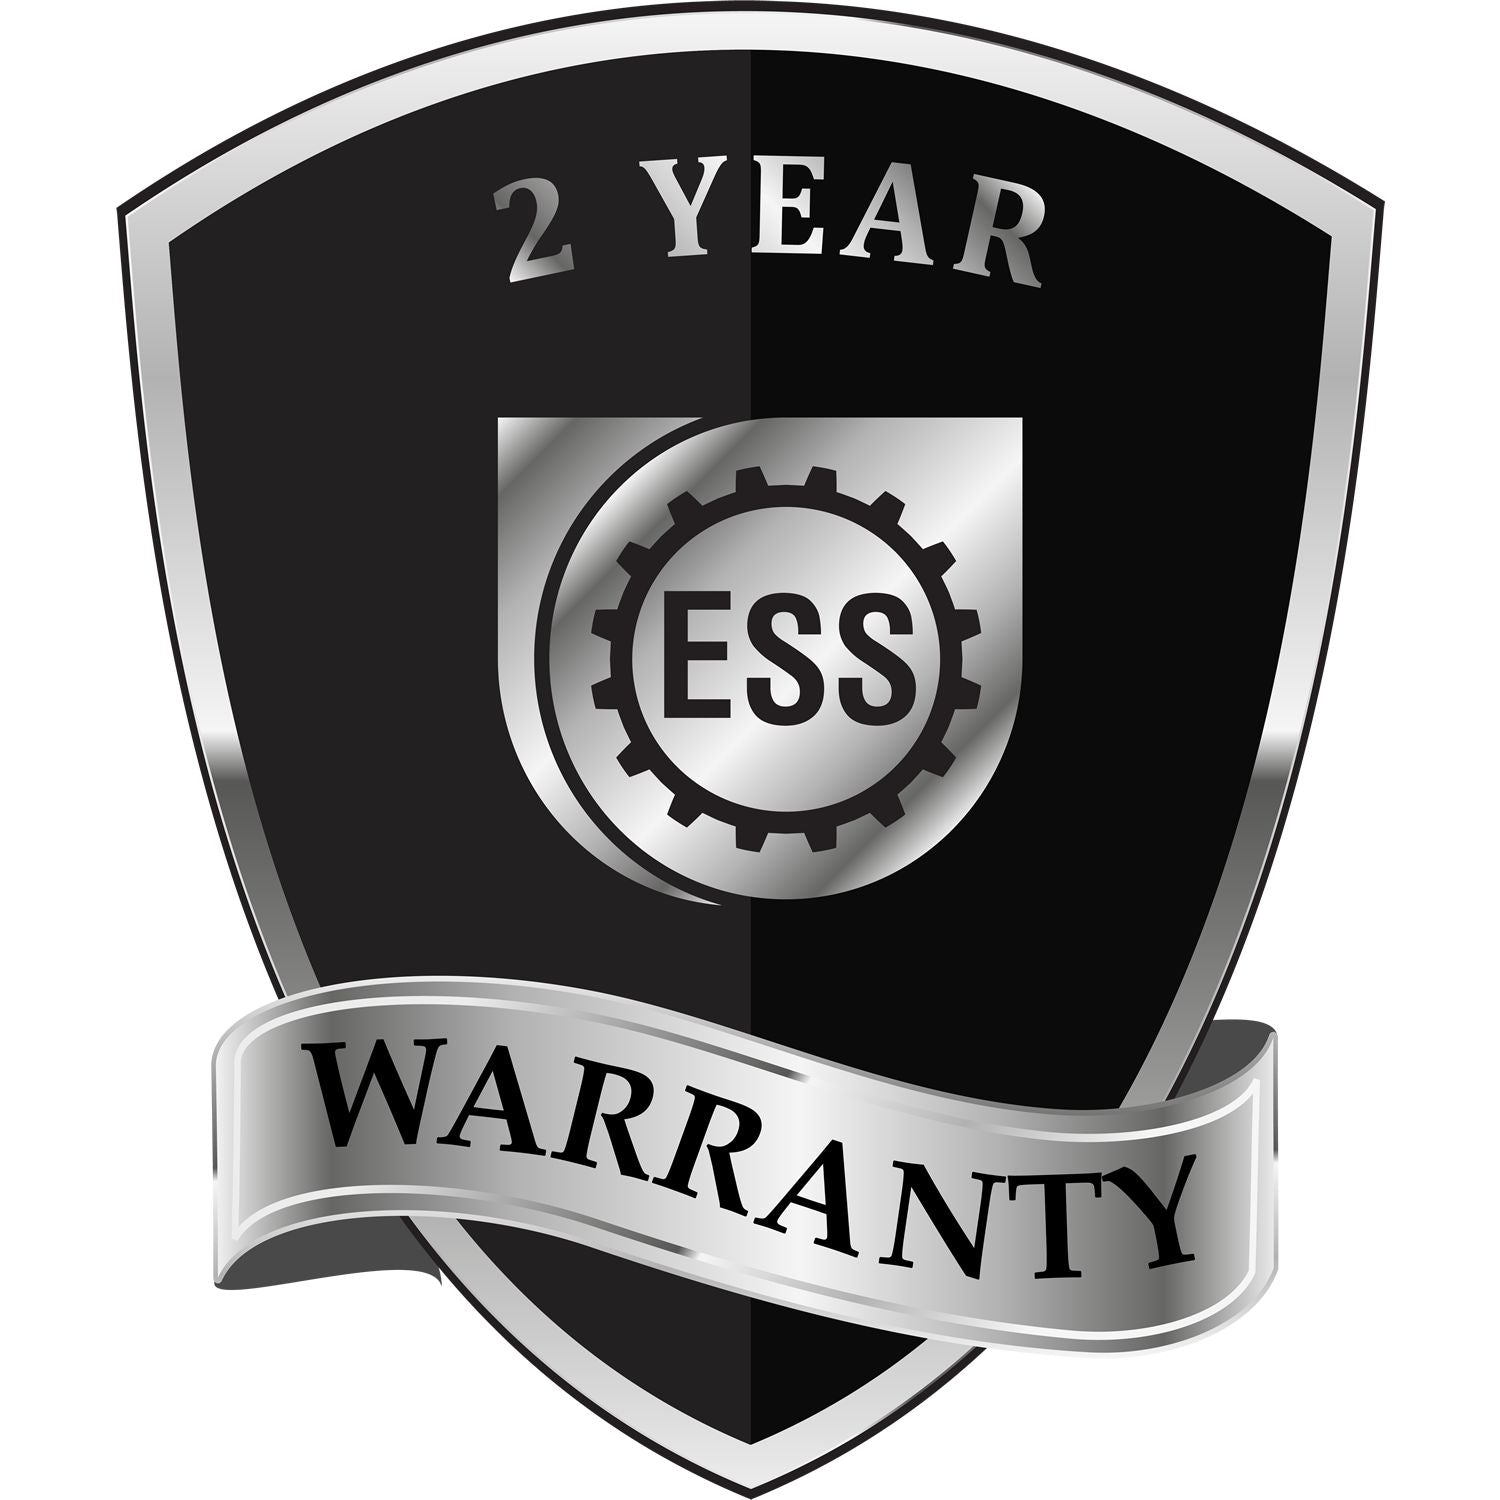 A badge or emblem showing a warranty icon for the Extended Long Reach Tennessee Surveyor Embosser